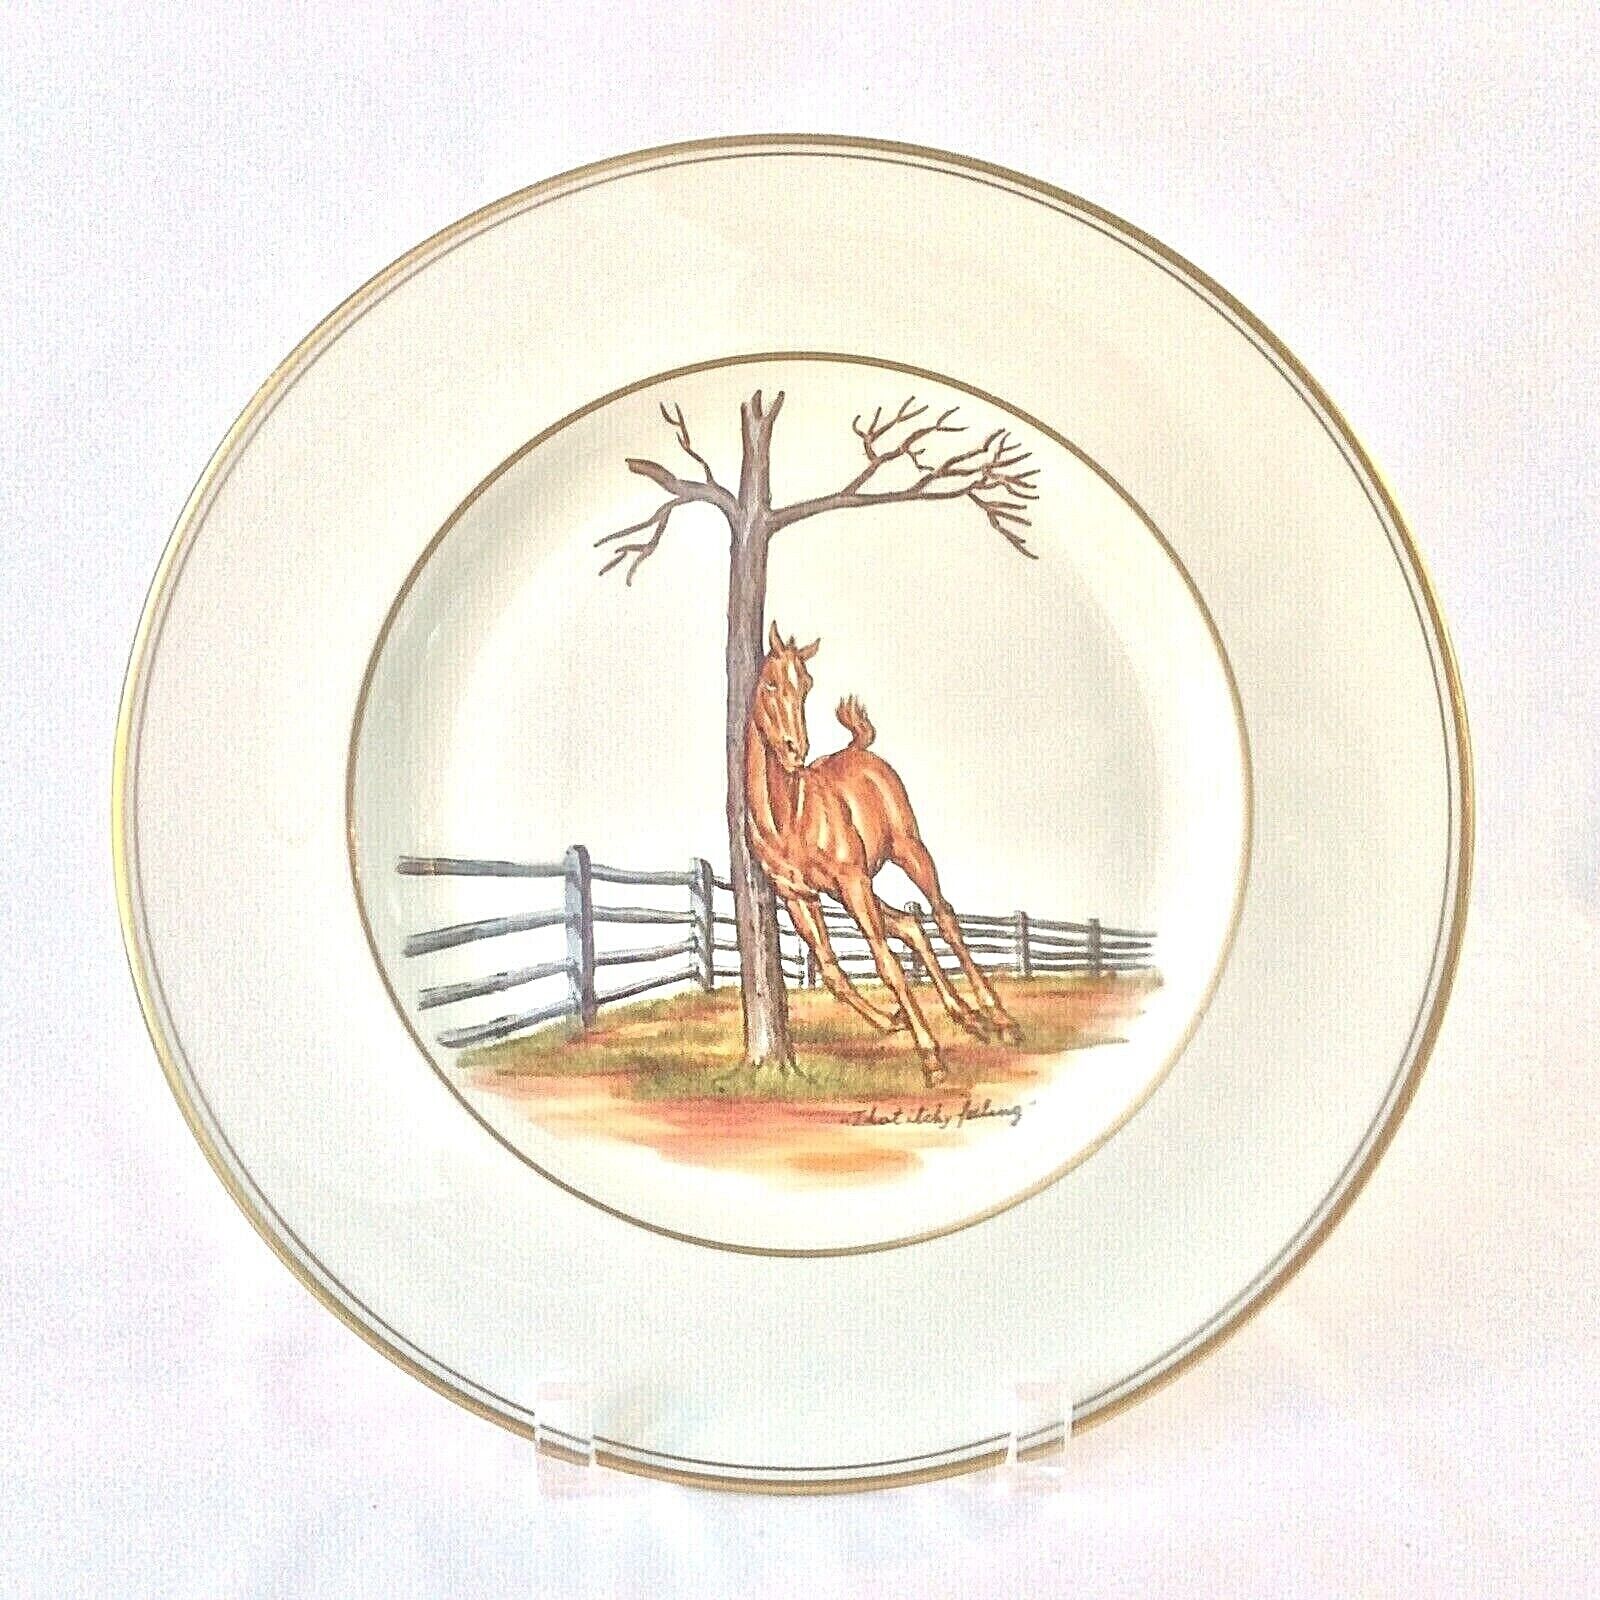 ABERCROMBIE FITCH FOAL HORSE PORC DINNER PL CHARGER 10.75